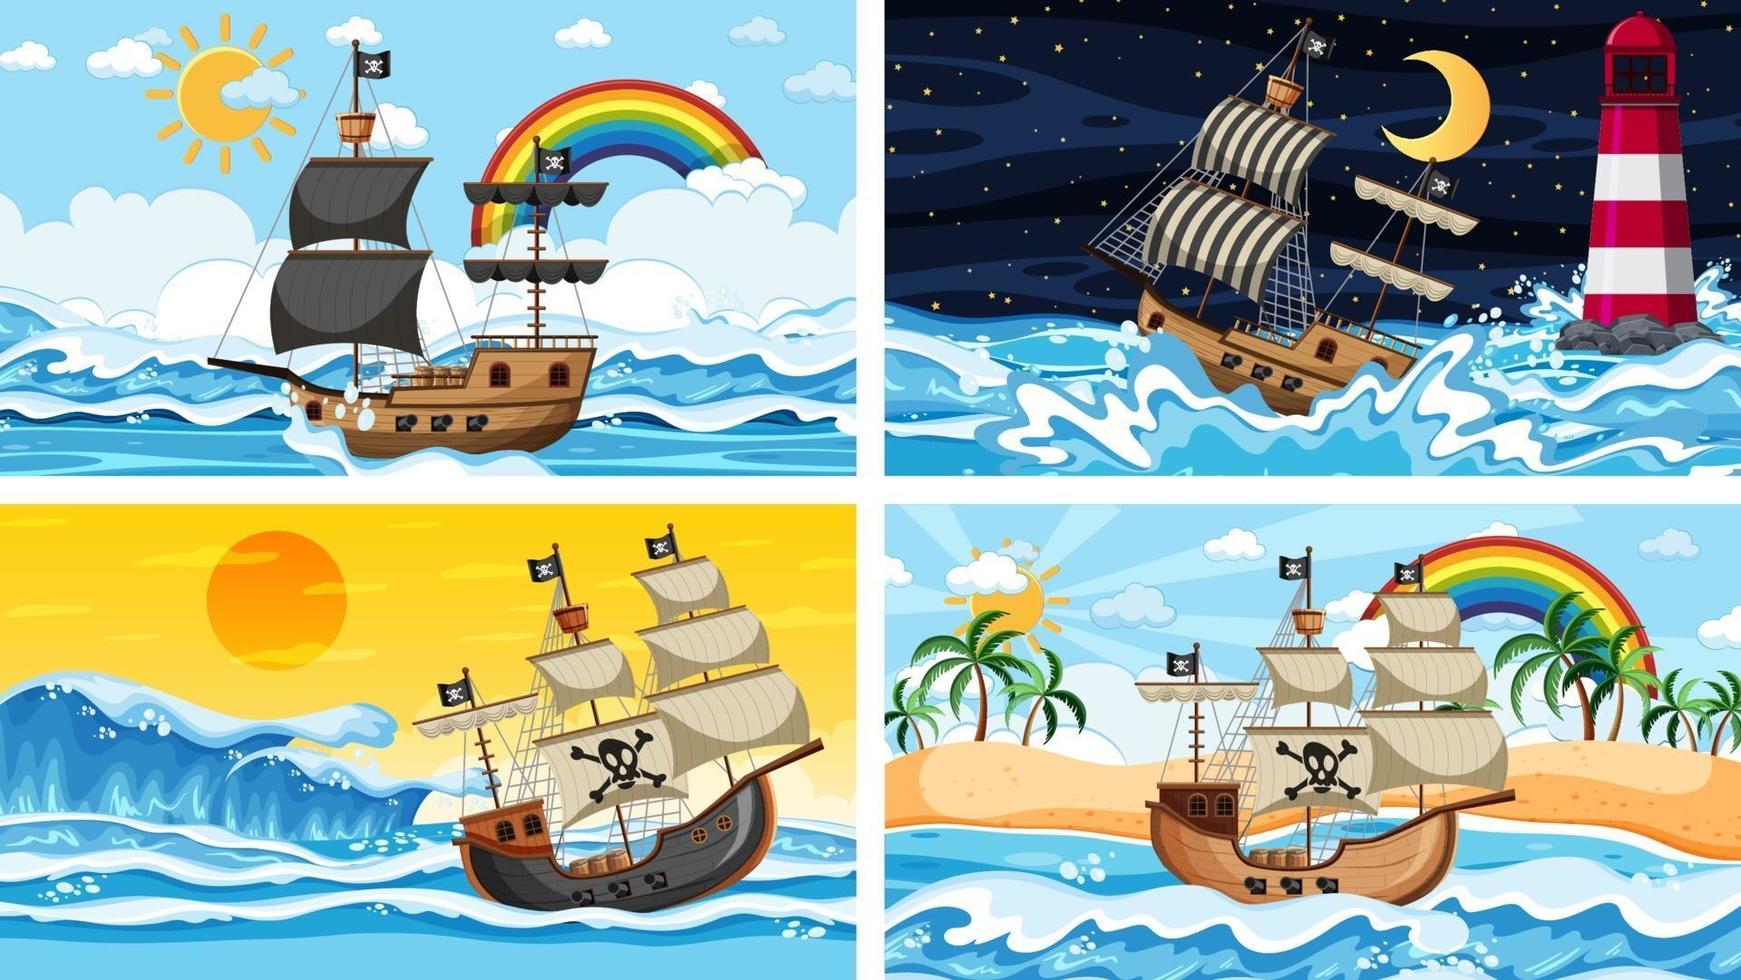 Set of Ocean with Pirate ship at different times scenes  in cartoon style vector